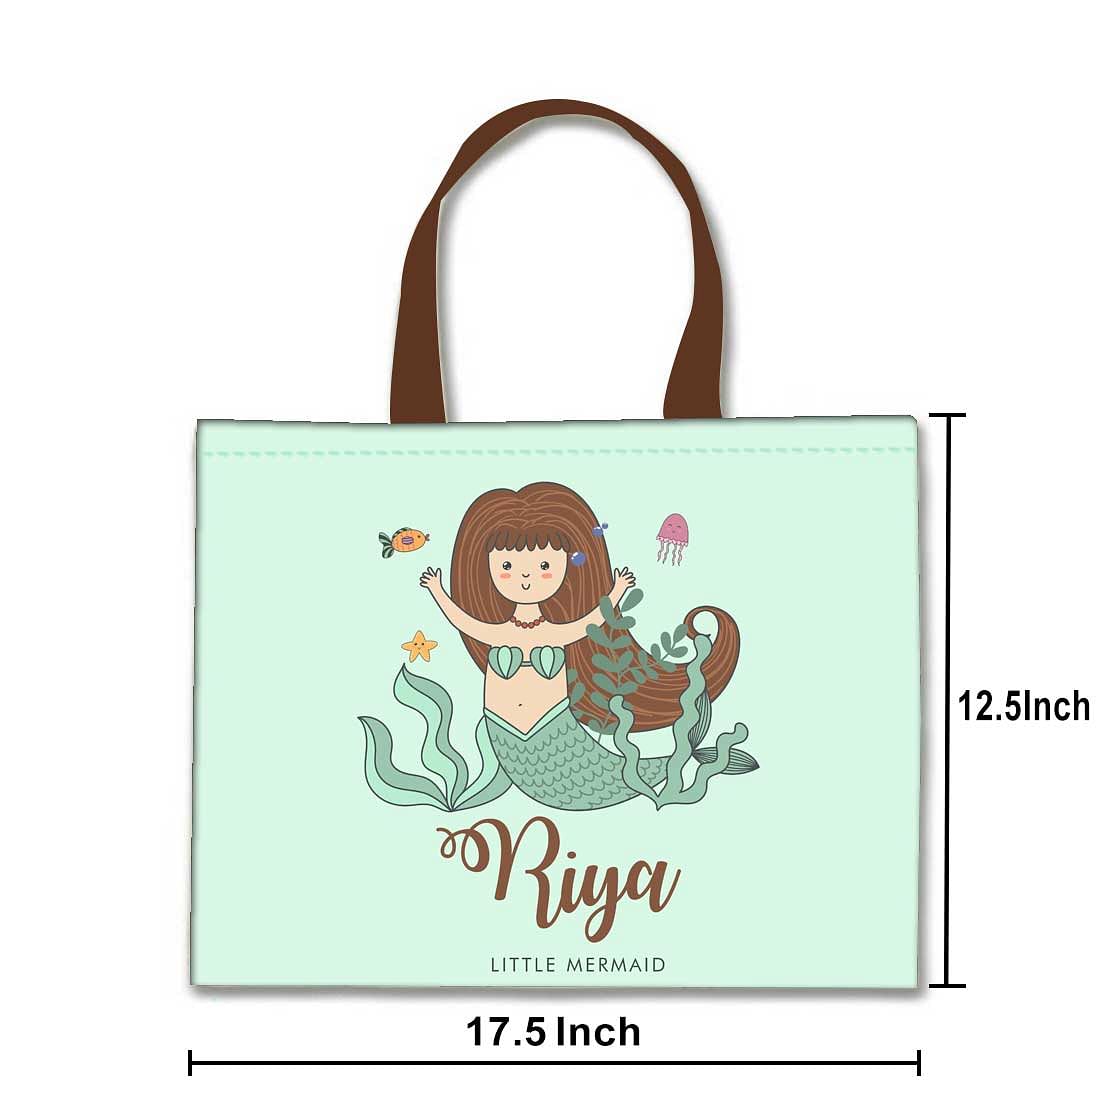 Nutcase Personalized Tote Bag for Women Gym Beach Travel Shopping Fash